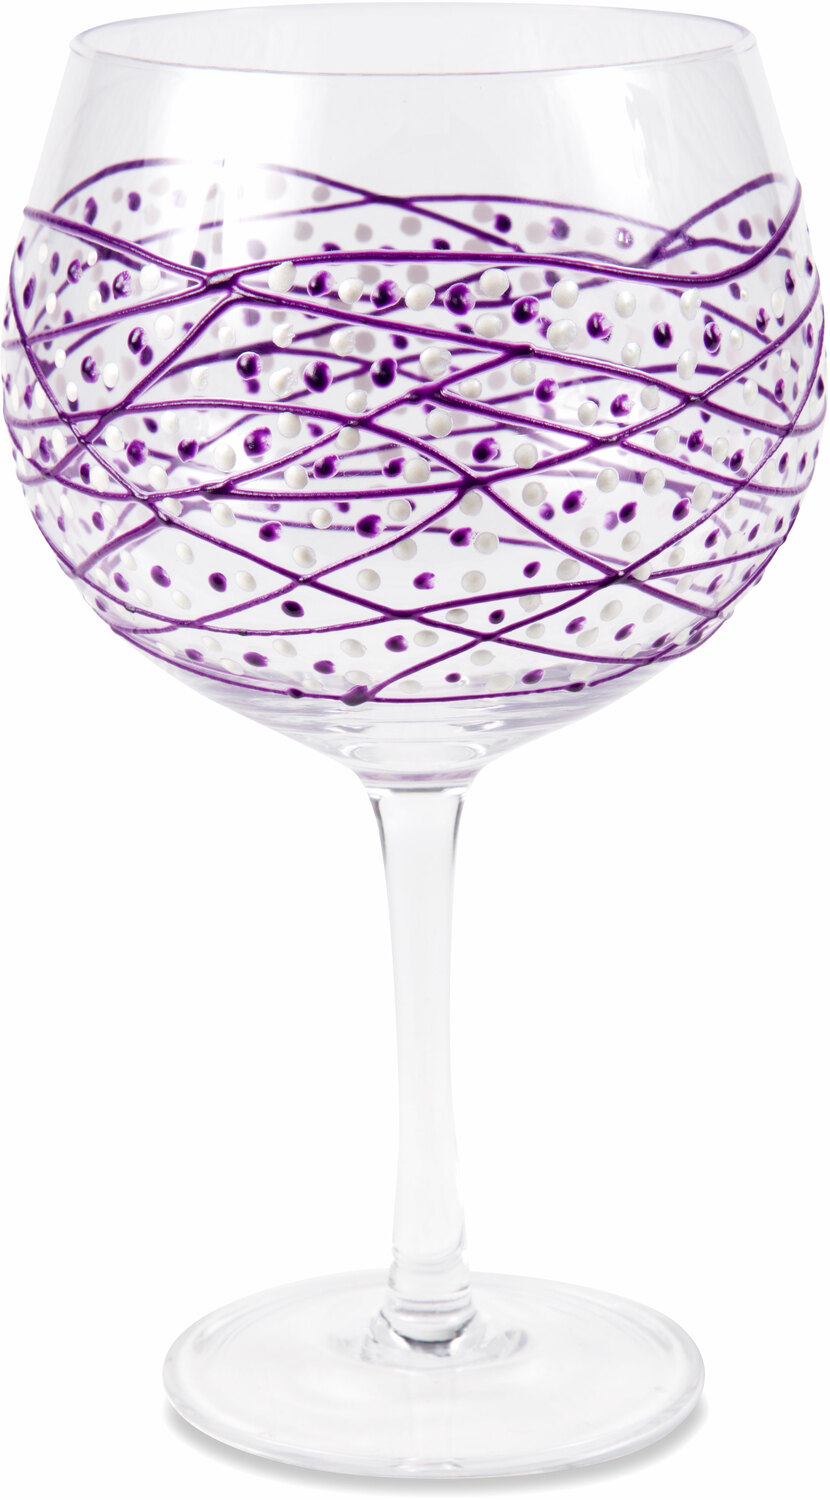 Purple Tangle by Sunny by Sue - Purple Tangle - 24 oz Hand Decorated Glass